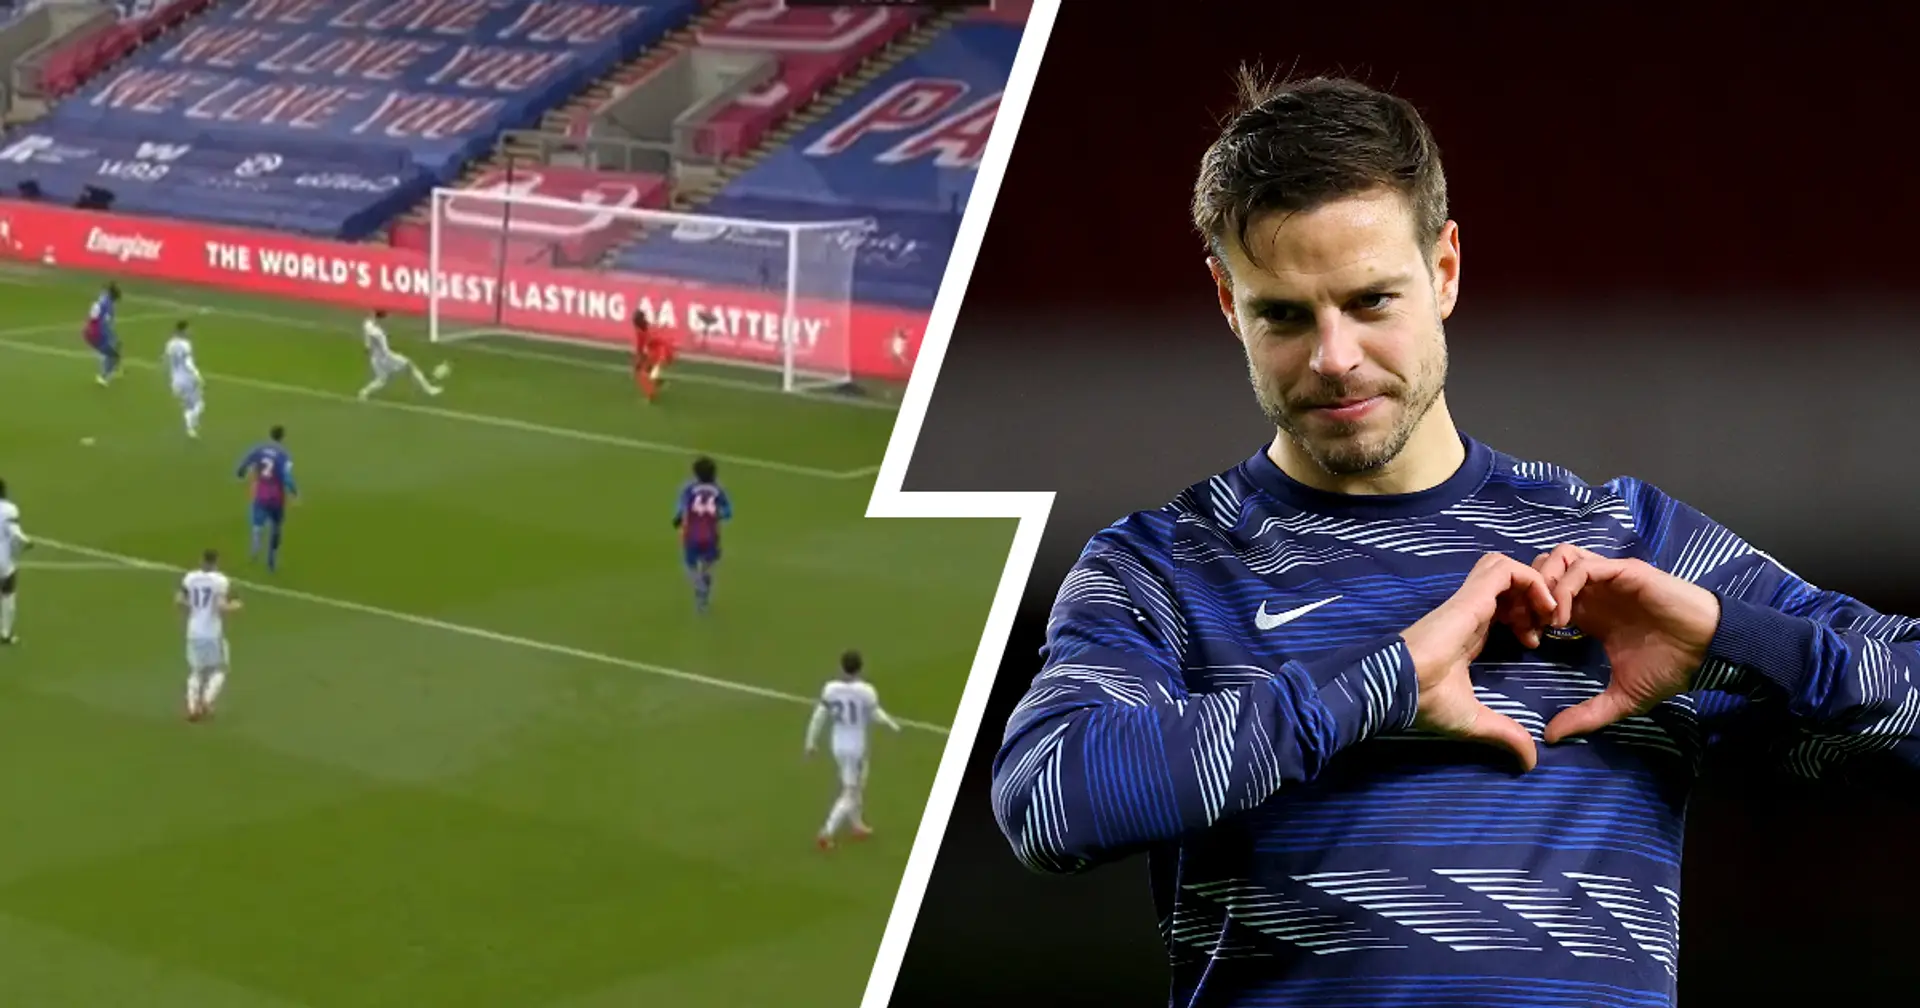 Cesar Azpilicueta's timely intervention to prevent Palace goal deserves a closer look